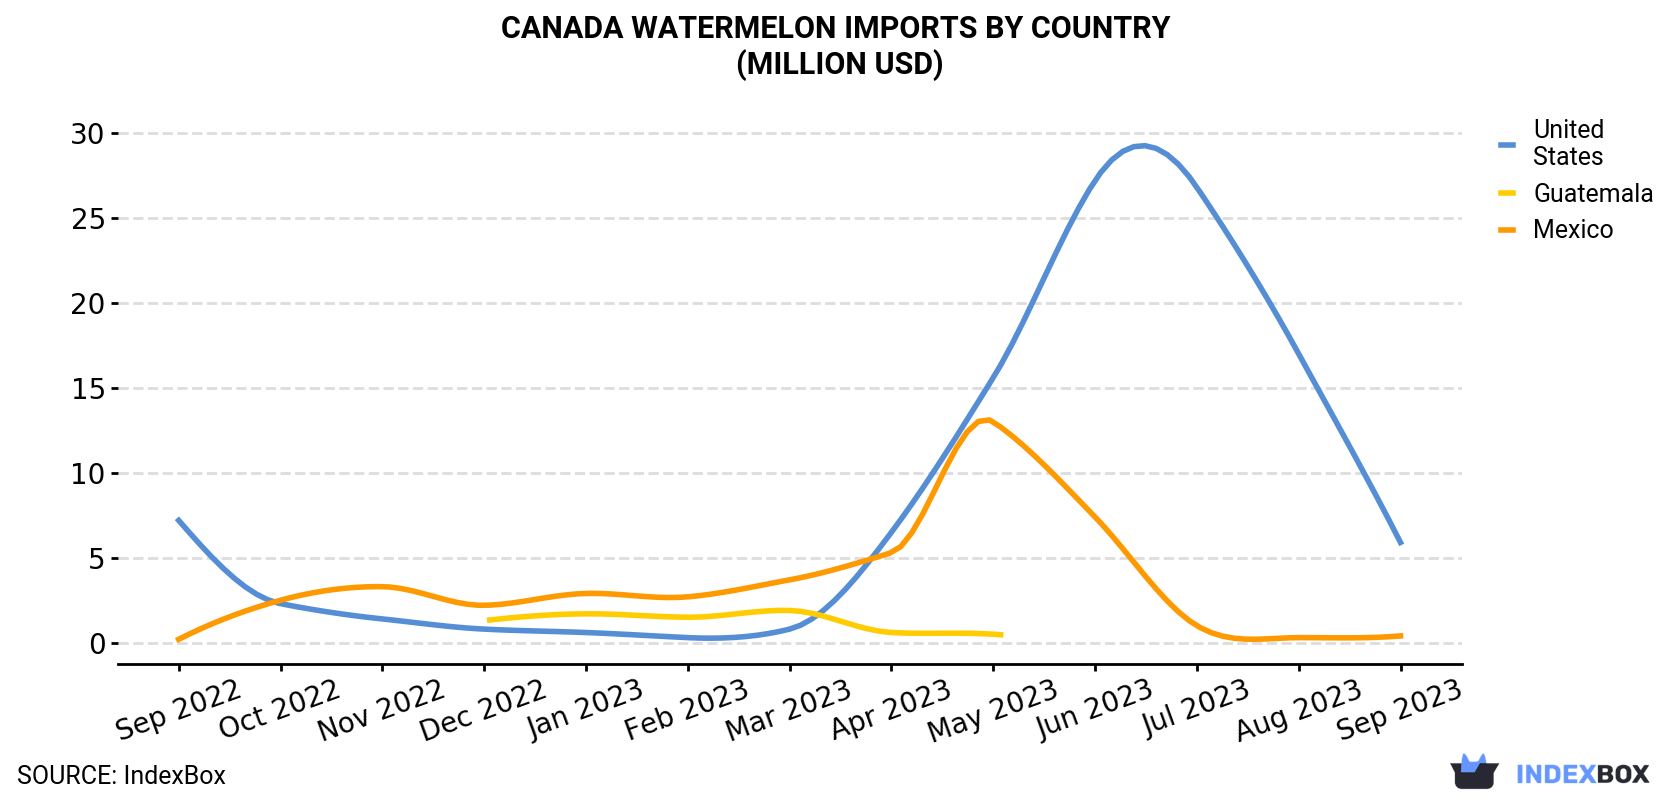 Canada Watermelon Imports By Country (Million USD)